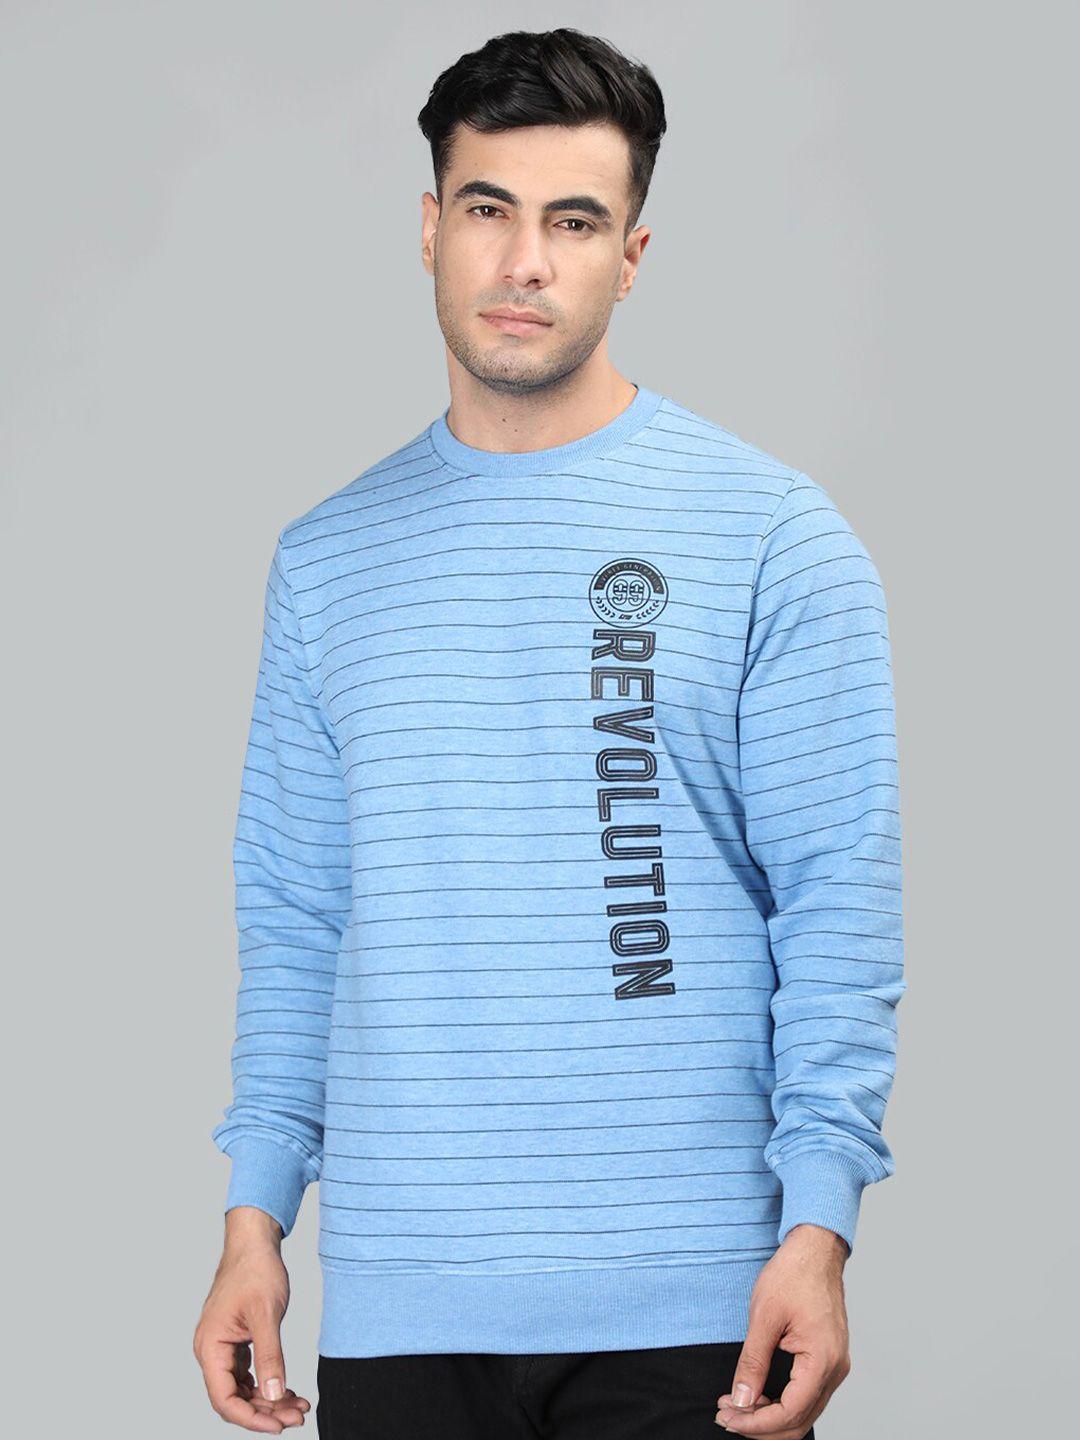 neva-striped-long-sleeves-cotton-pullover